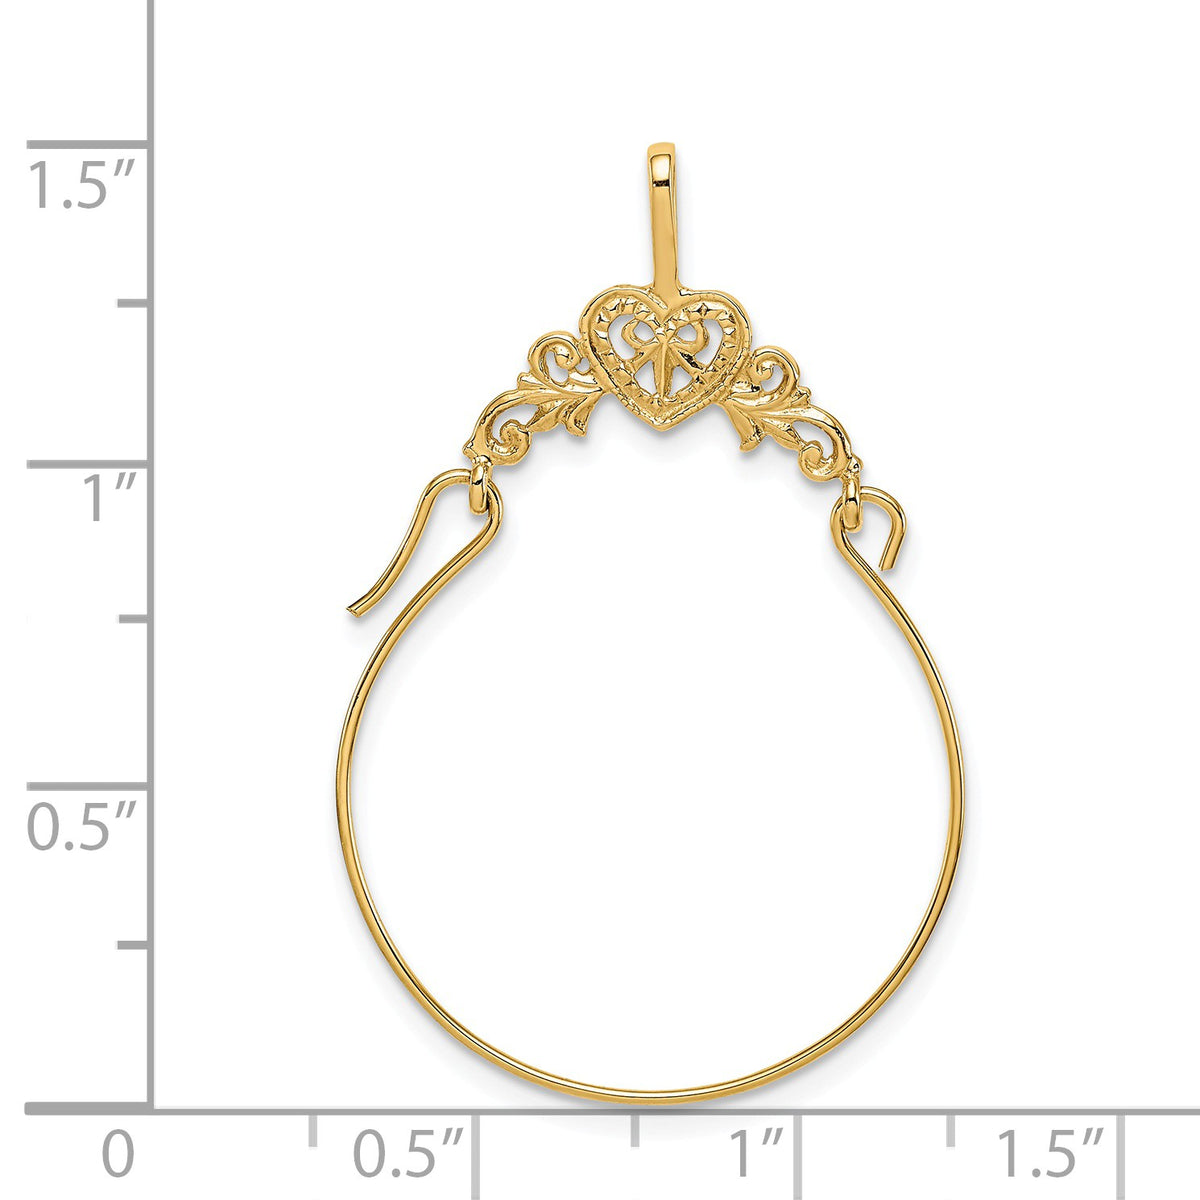 Alternate view of the 14k Yellow Gold Filigree Heart Charm Holder Pendant, 23mm by The Black Bow Jewelry Co.